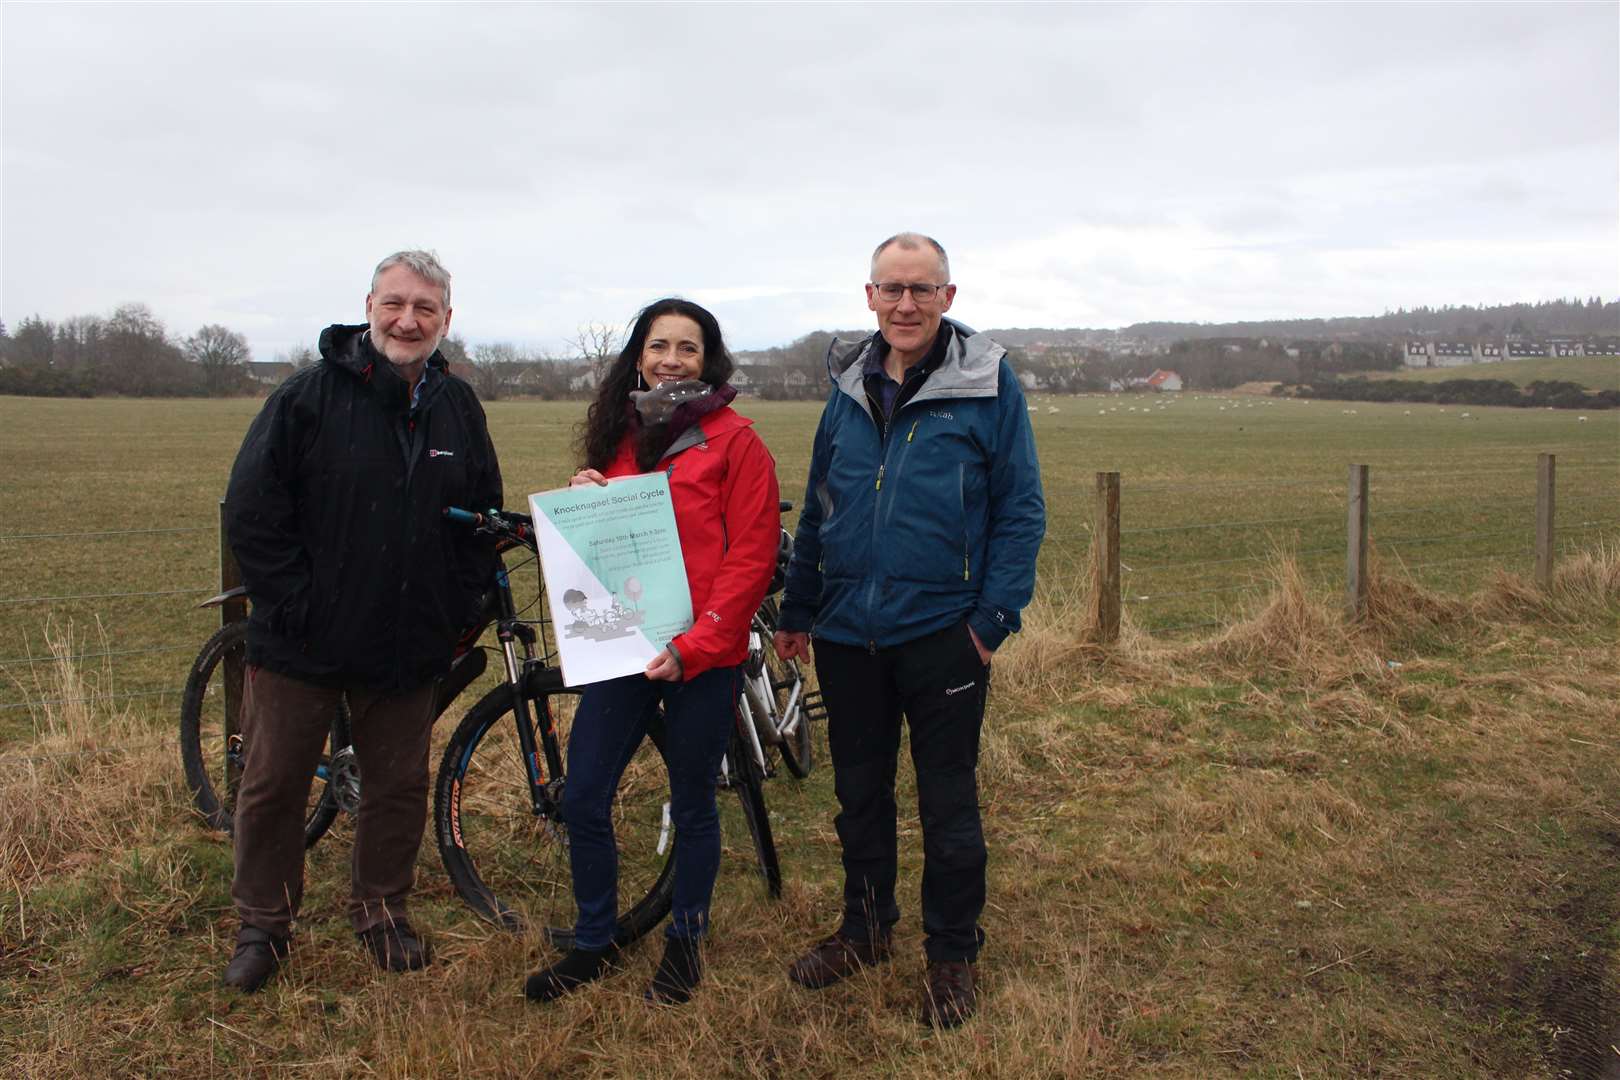 Knocknagael Ltd is organising a social cycle and walk to the Smiddy Field where it plans to develop a green hub for the community. From left: Steve Rowan, director; Maria de la Torre, chairwoman; and Ronald MacVicar, director. Picture: John Davidson